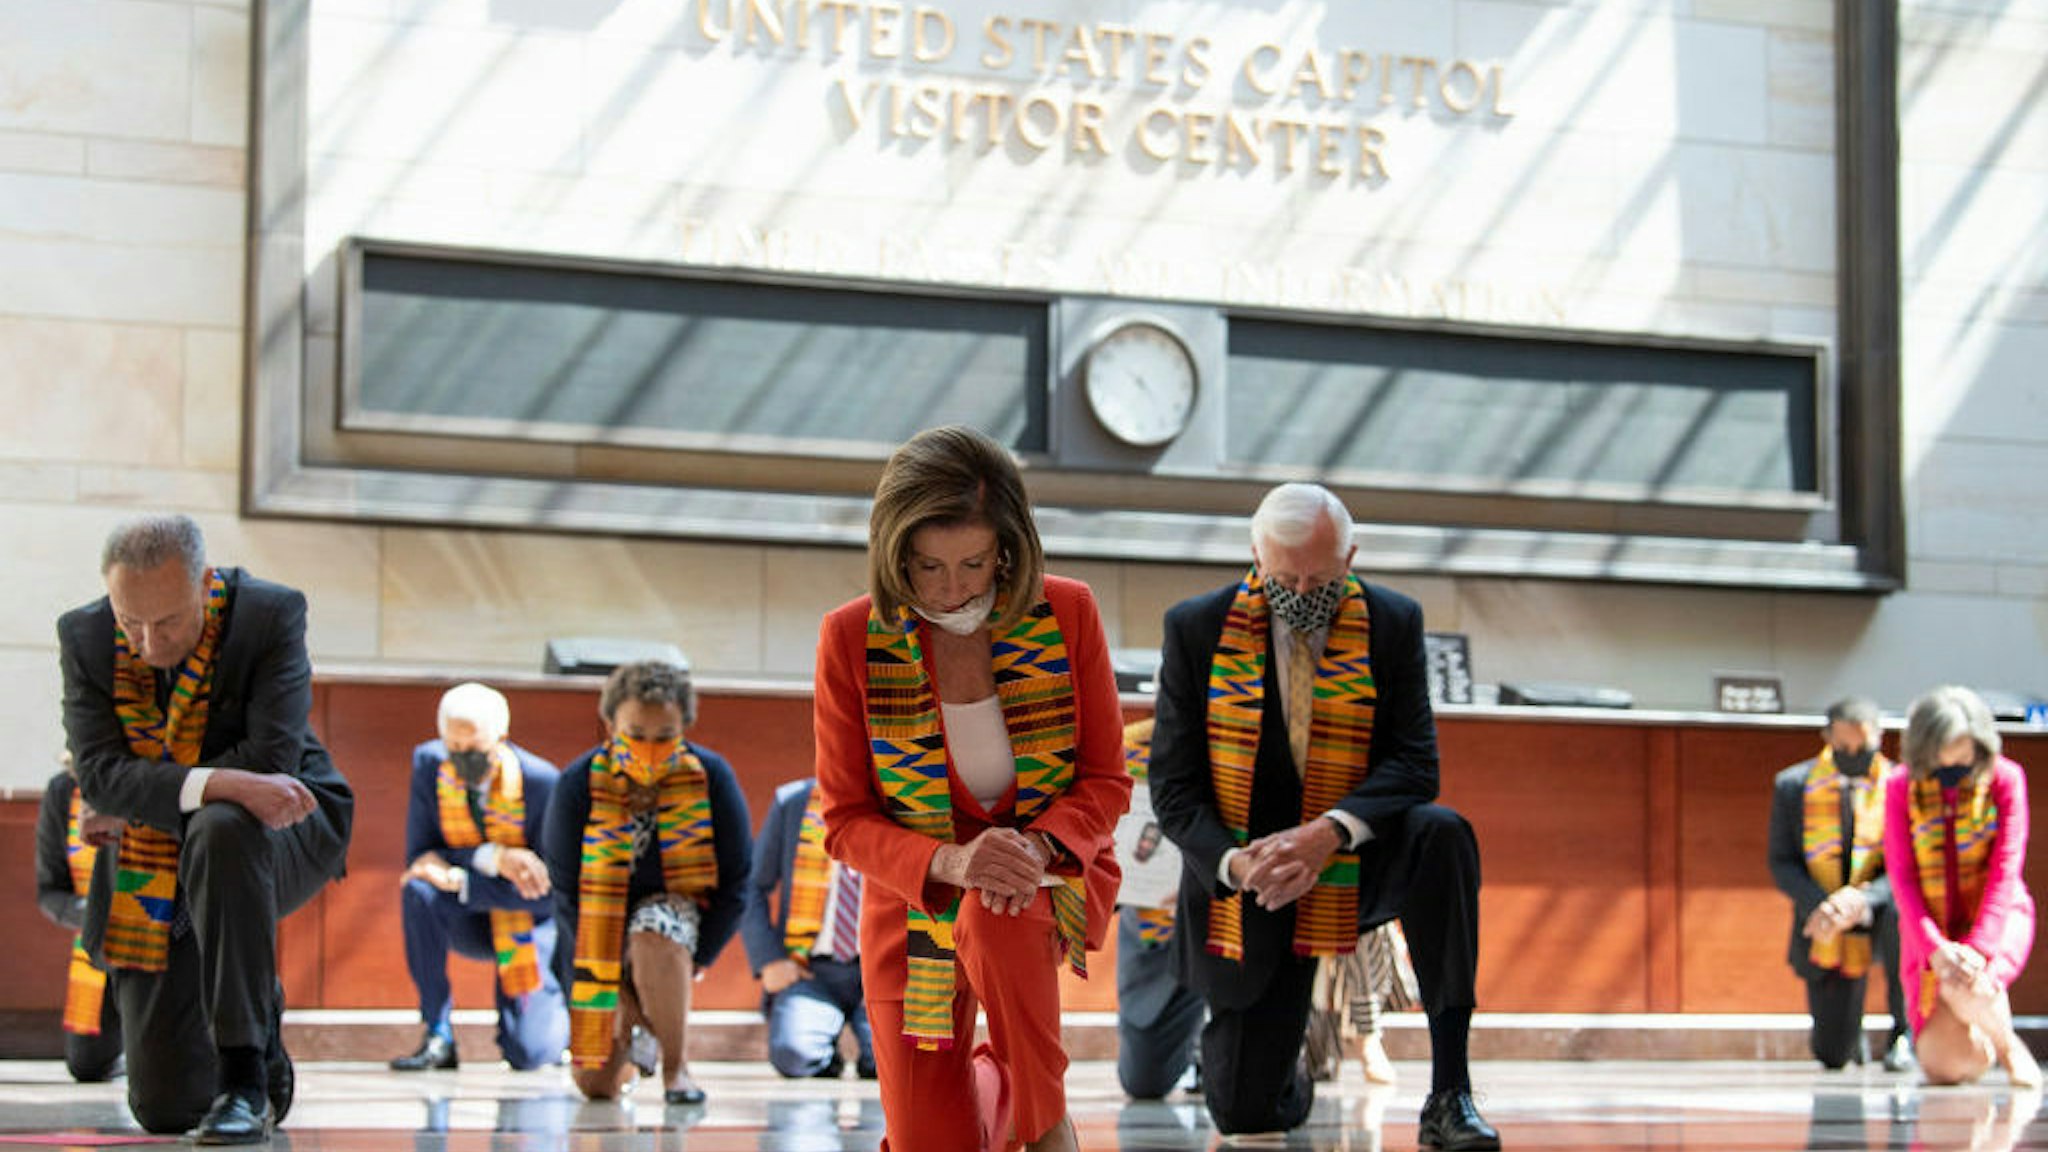 UNITED STATES - JUNE 8: Speaker of the House Nancy Pelosi, D-Calif., and other members of Congress gather at the Emancipation Hall, kneel as they take moment of silence to honor George Floyd, and victims of racial injustice on Monday, June 8, 2020. (Photo by Caroline Brehman/CQ Roll Call)